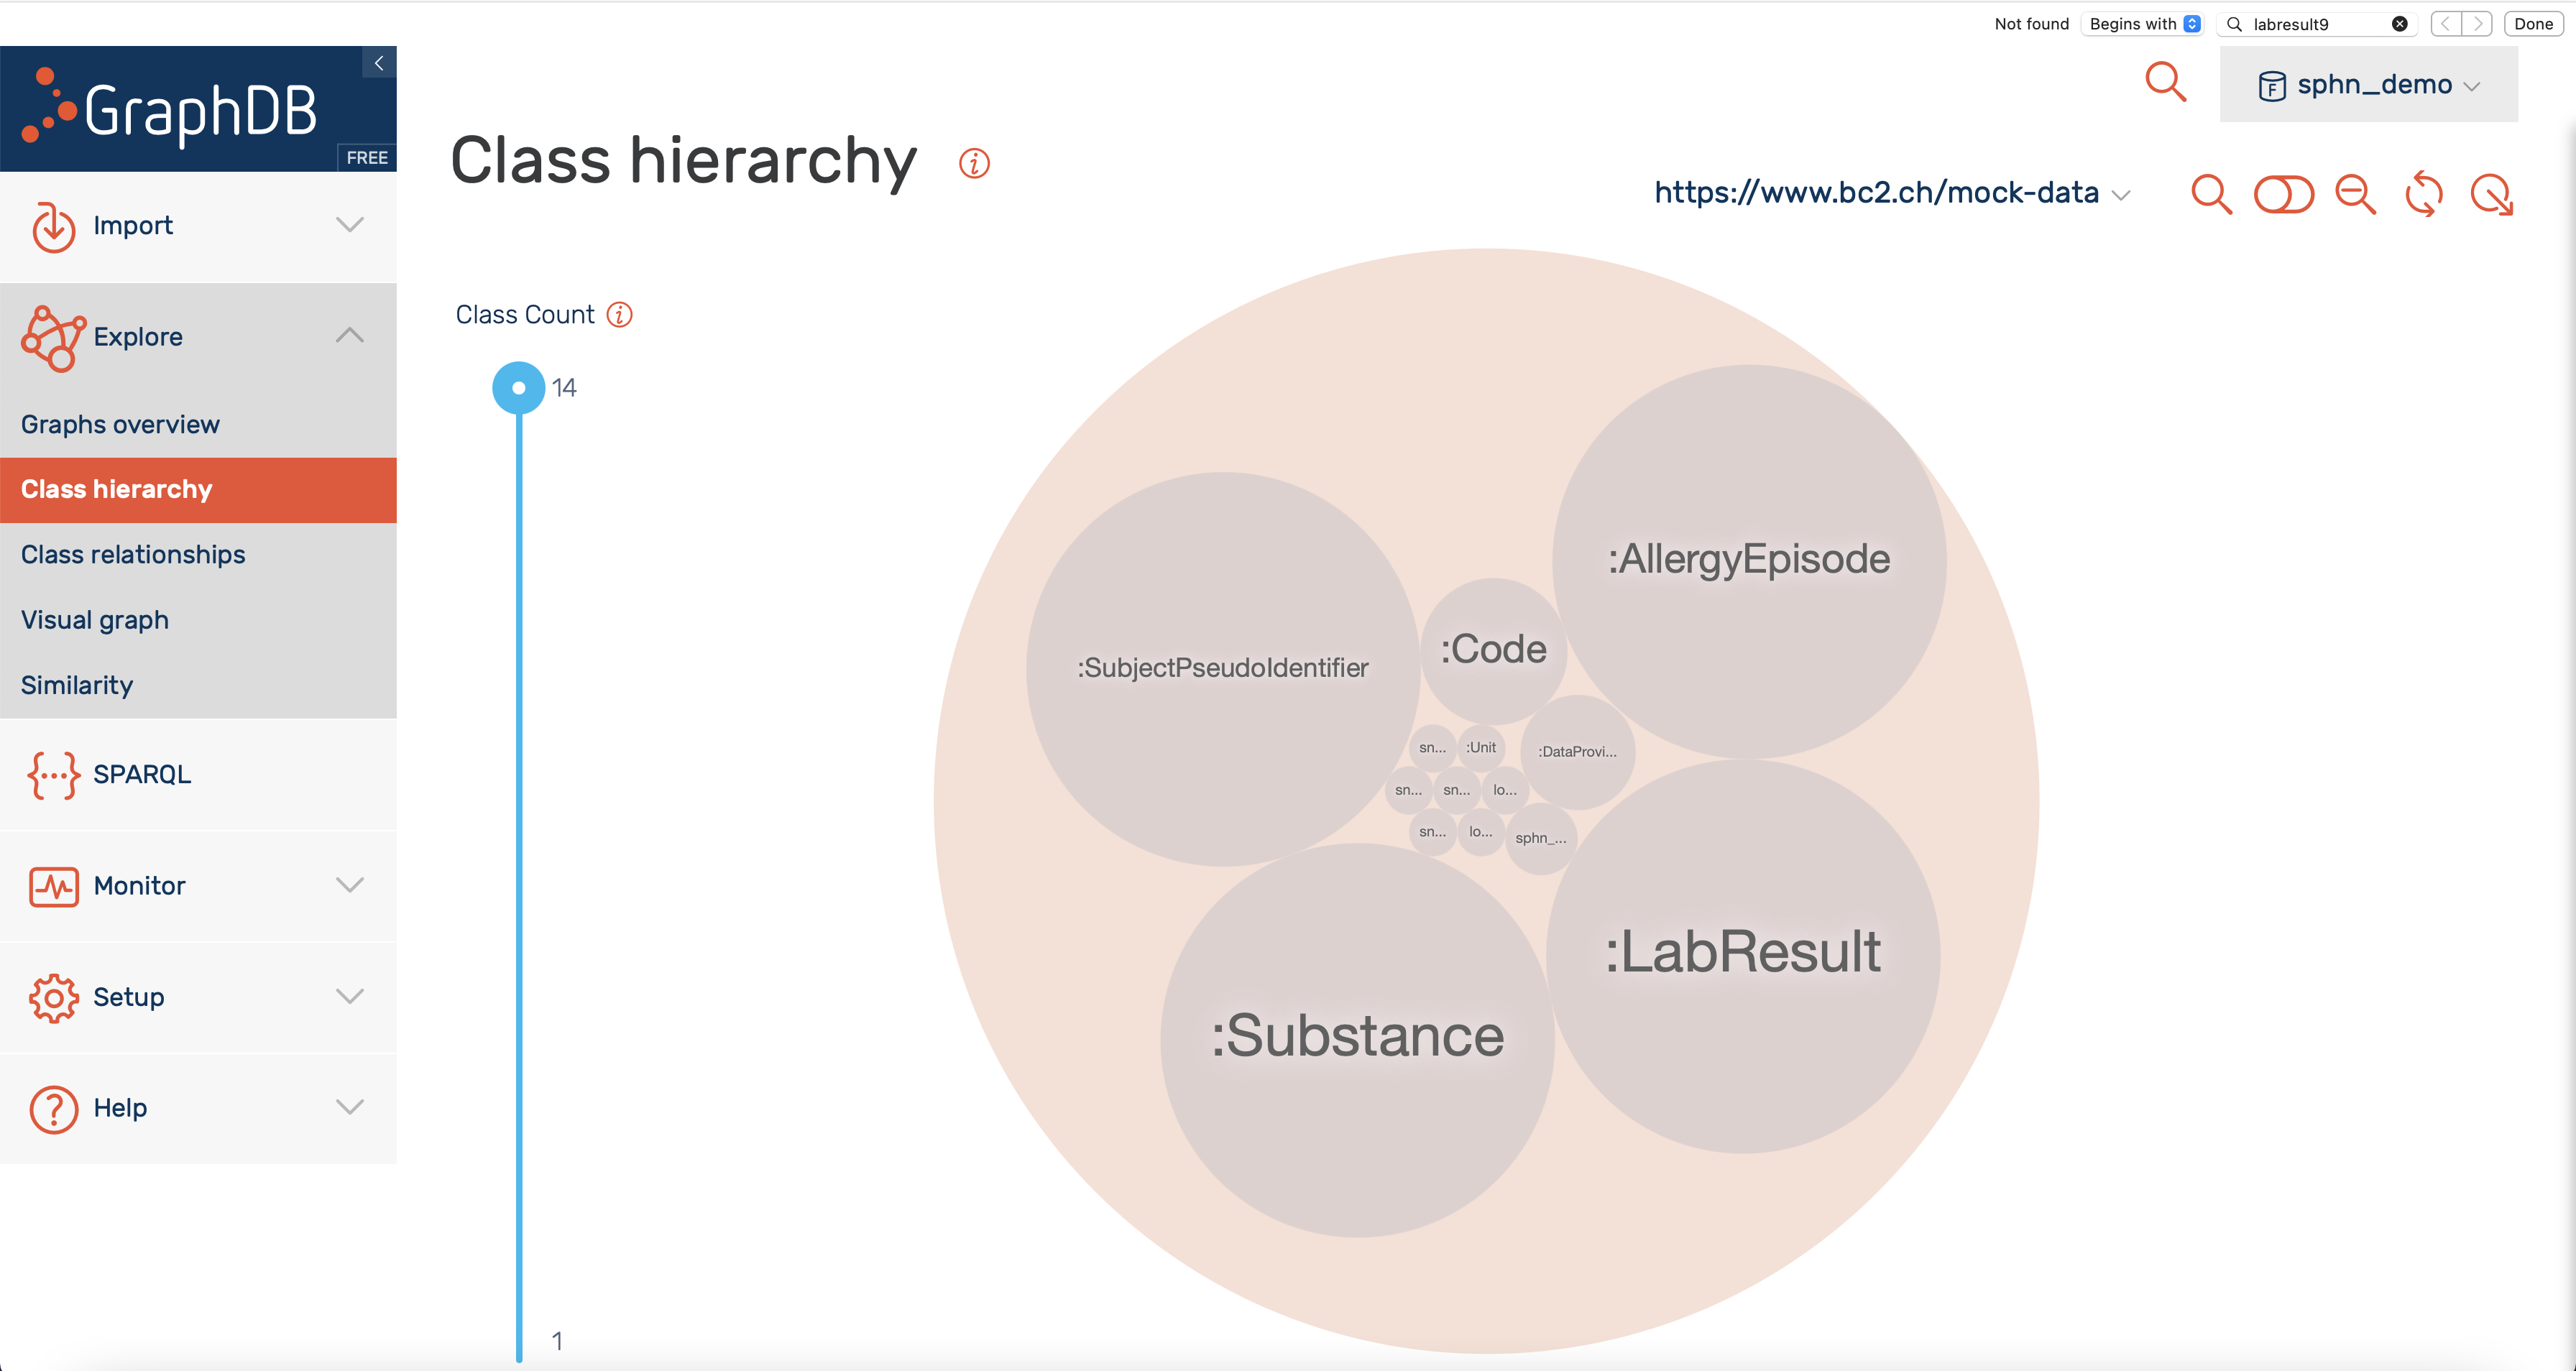 Class hierarchy visualization.